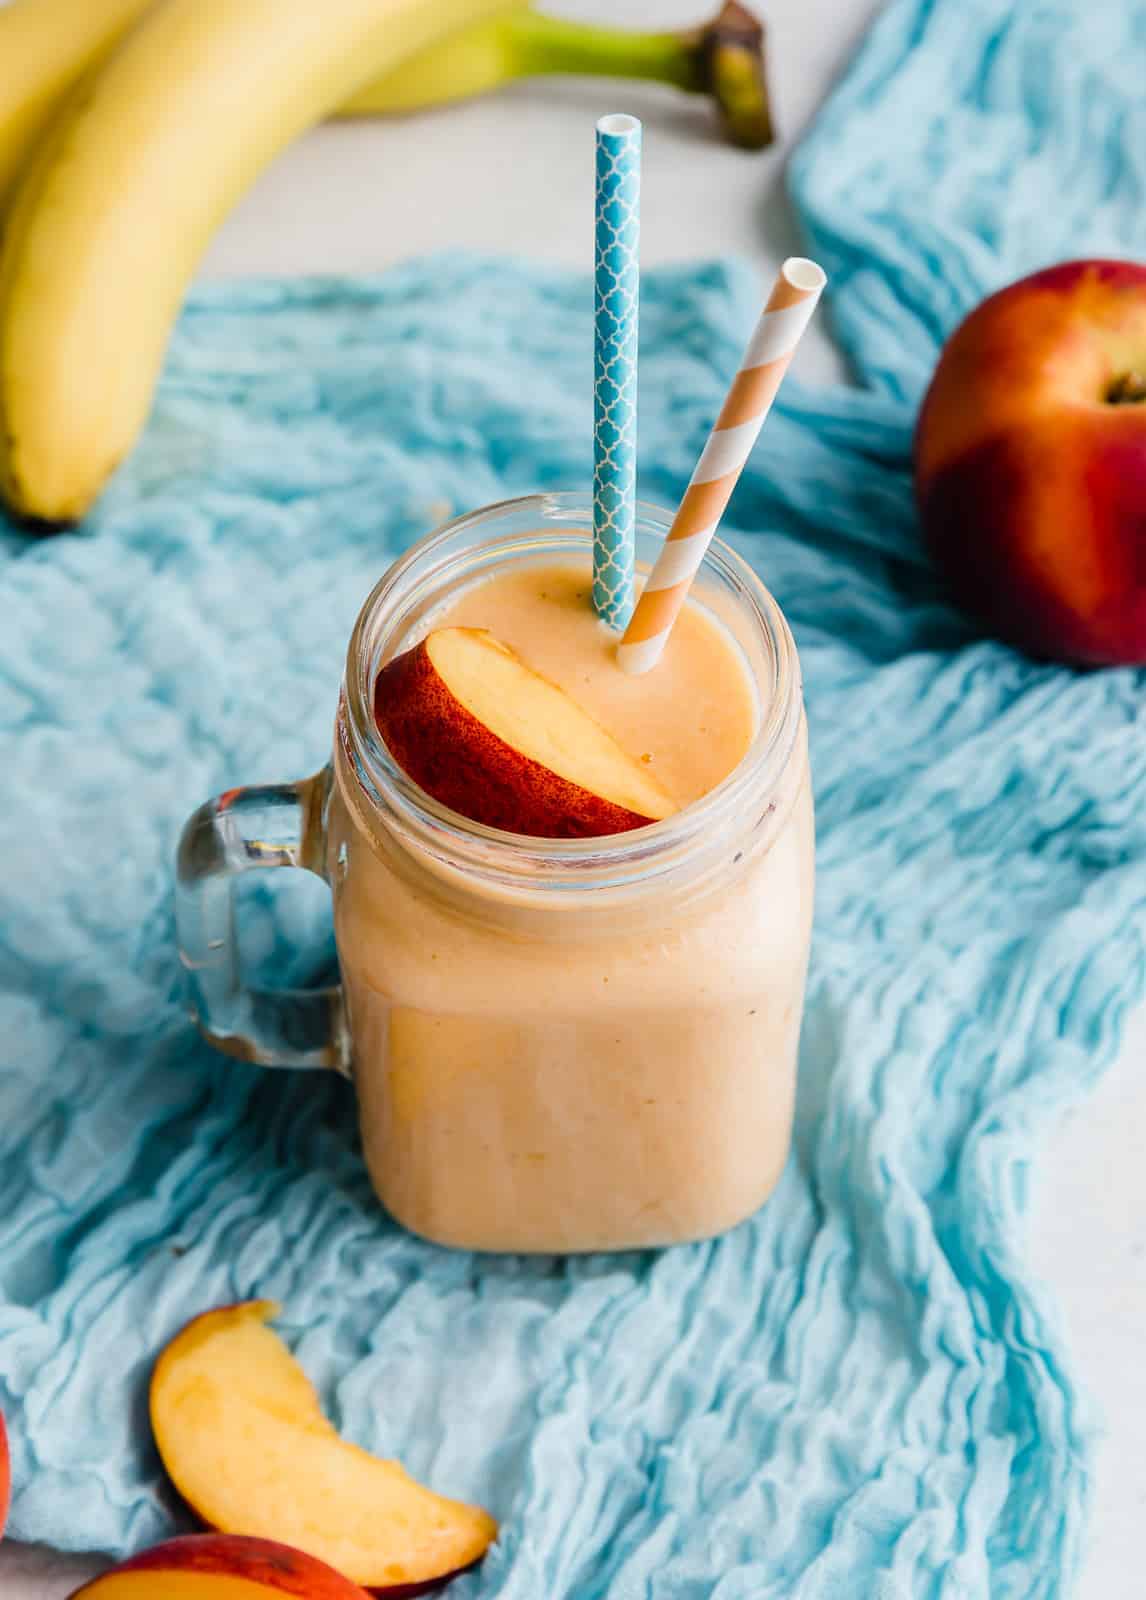 A glass cup filled with a banana peach smoothie topped with a slice of fresh peach.